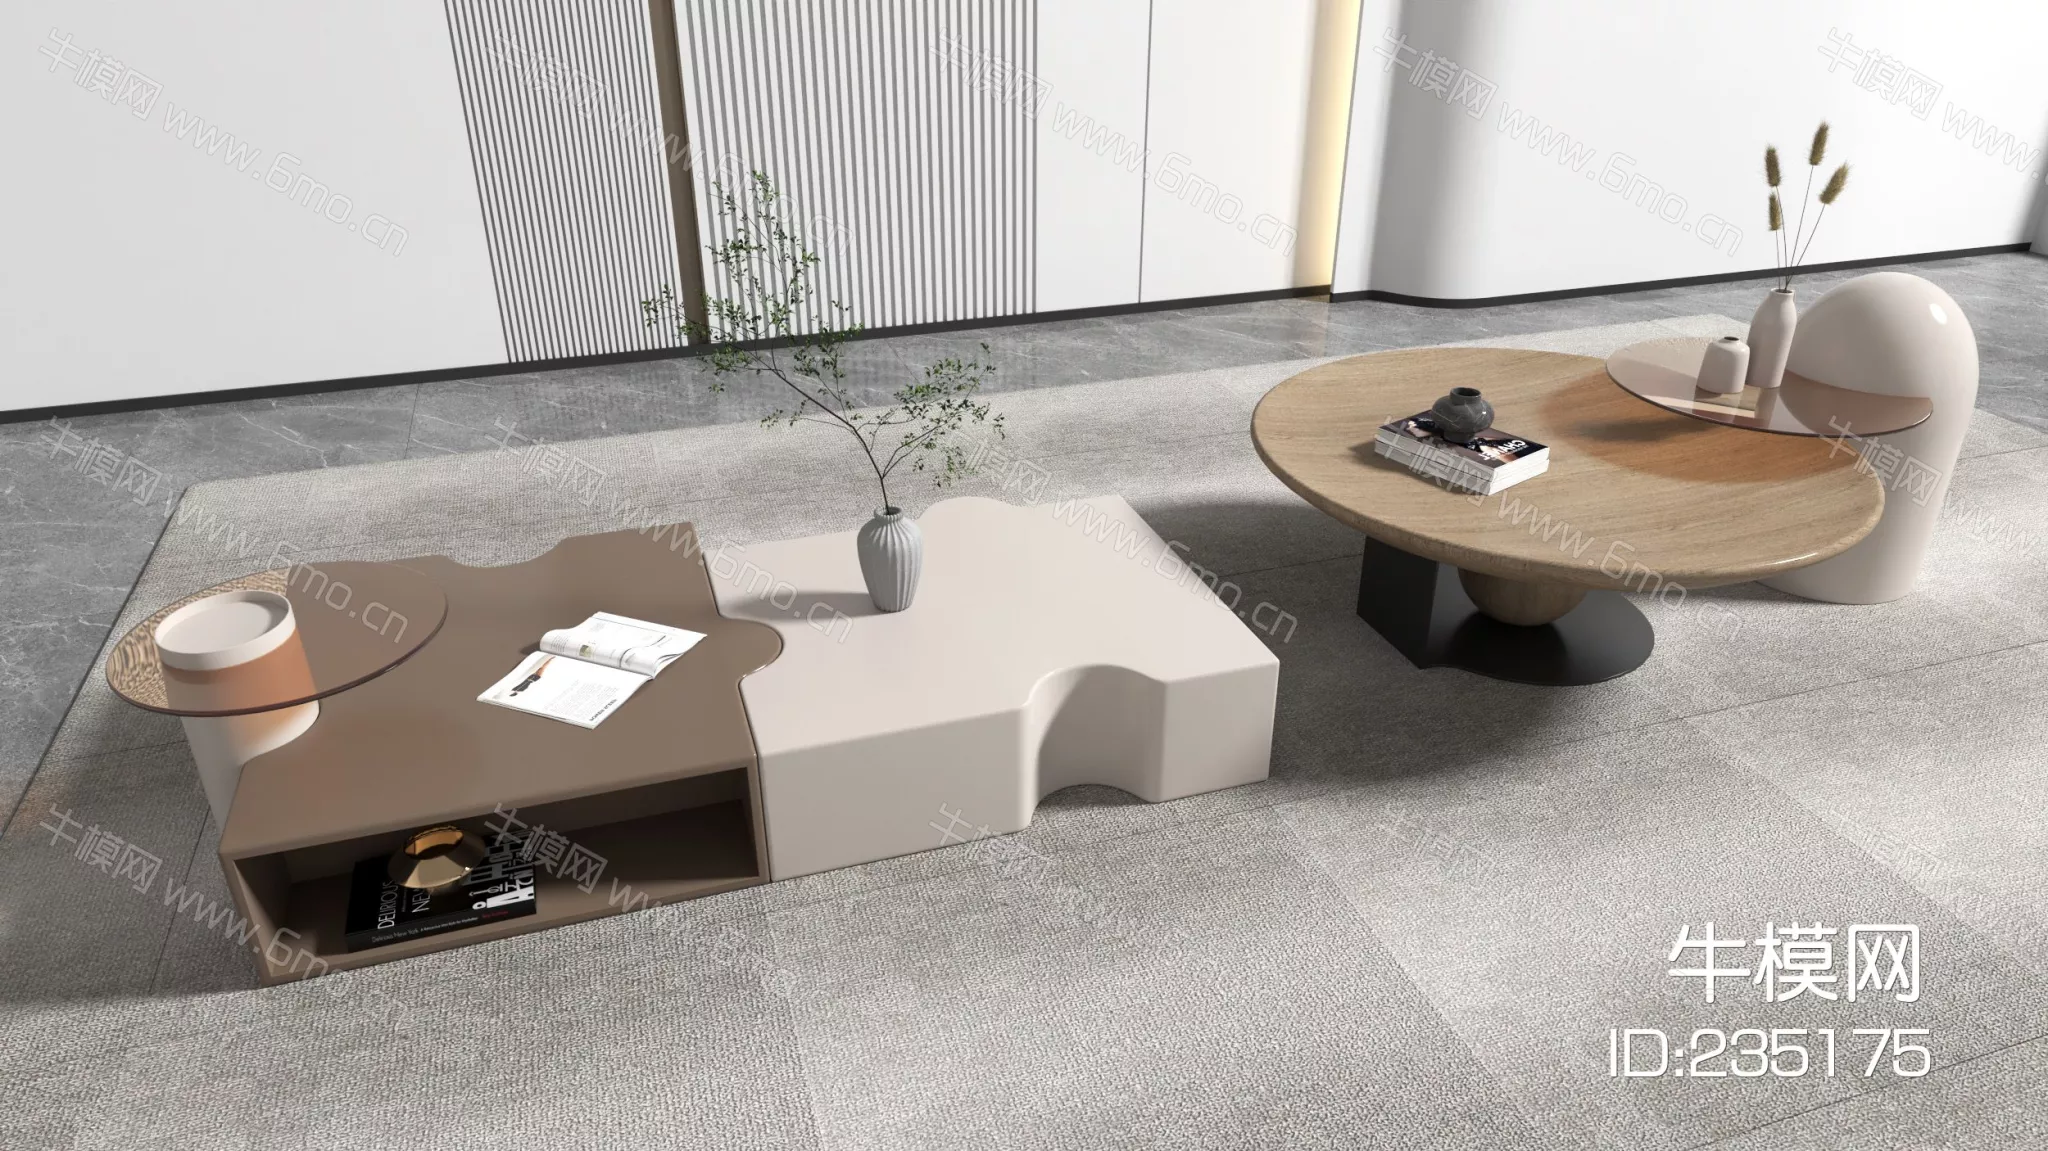 NORDIC COFFEE TABLE - SKETCHUP 3D MODEL - VRAY - 235175